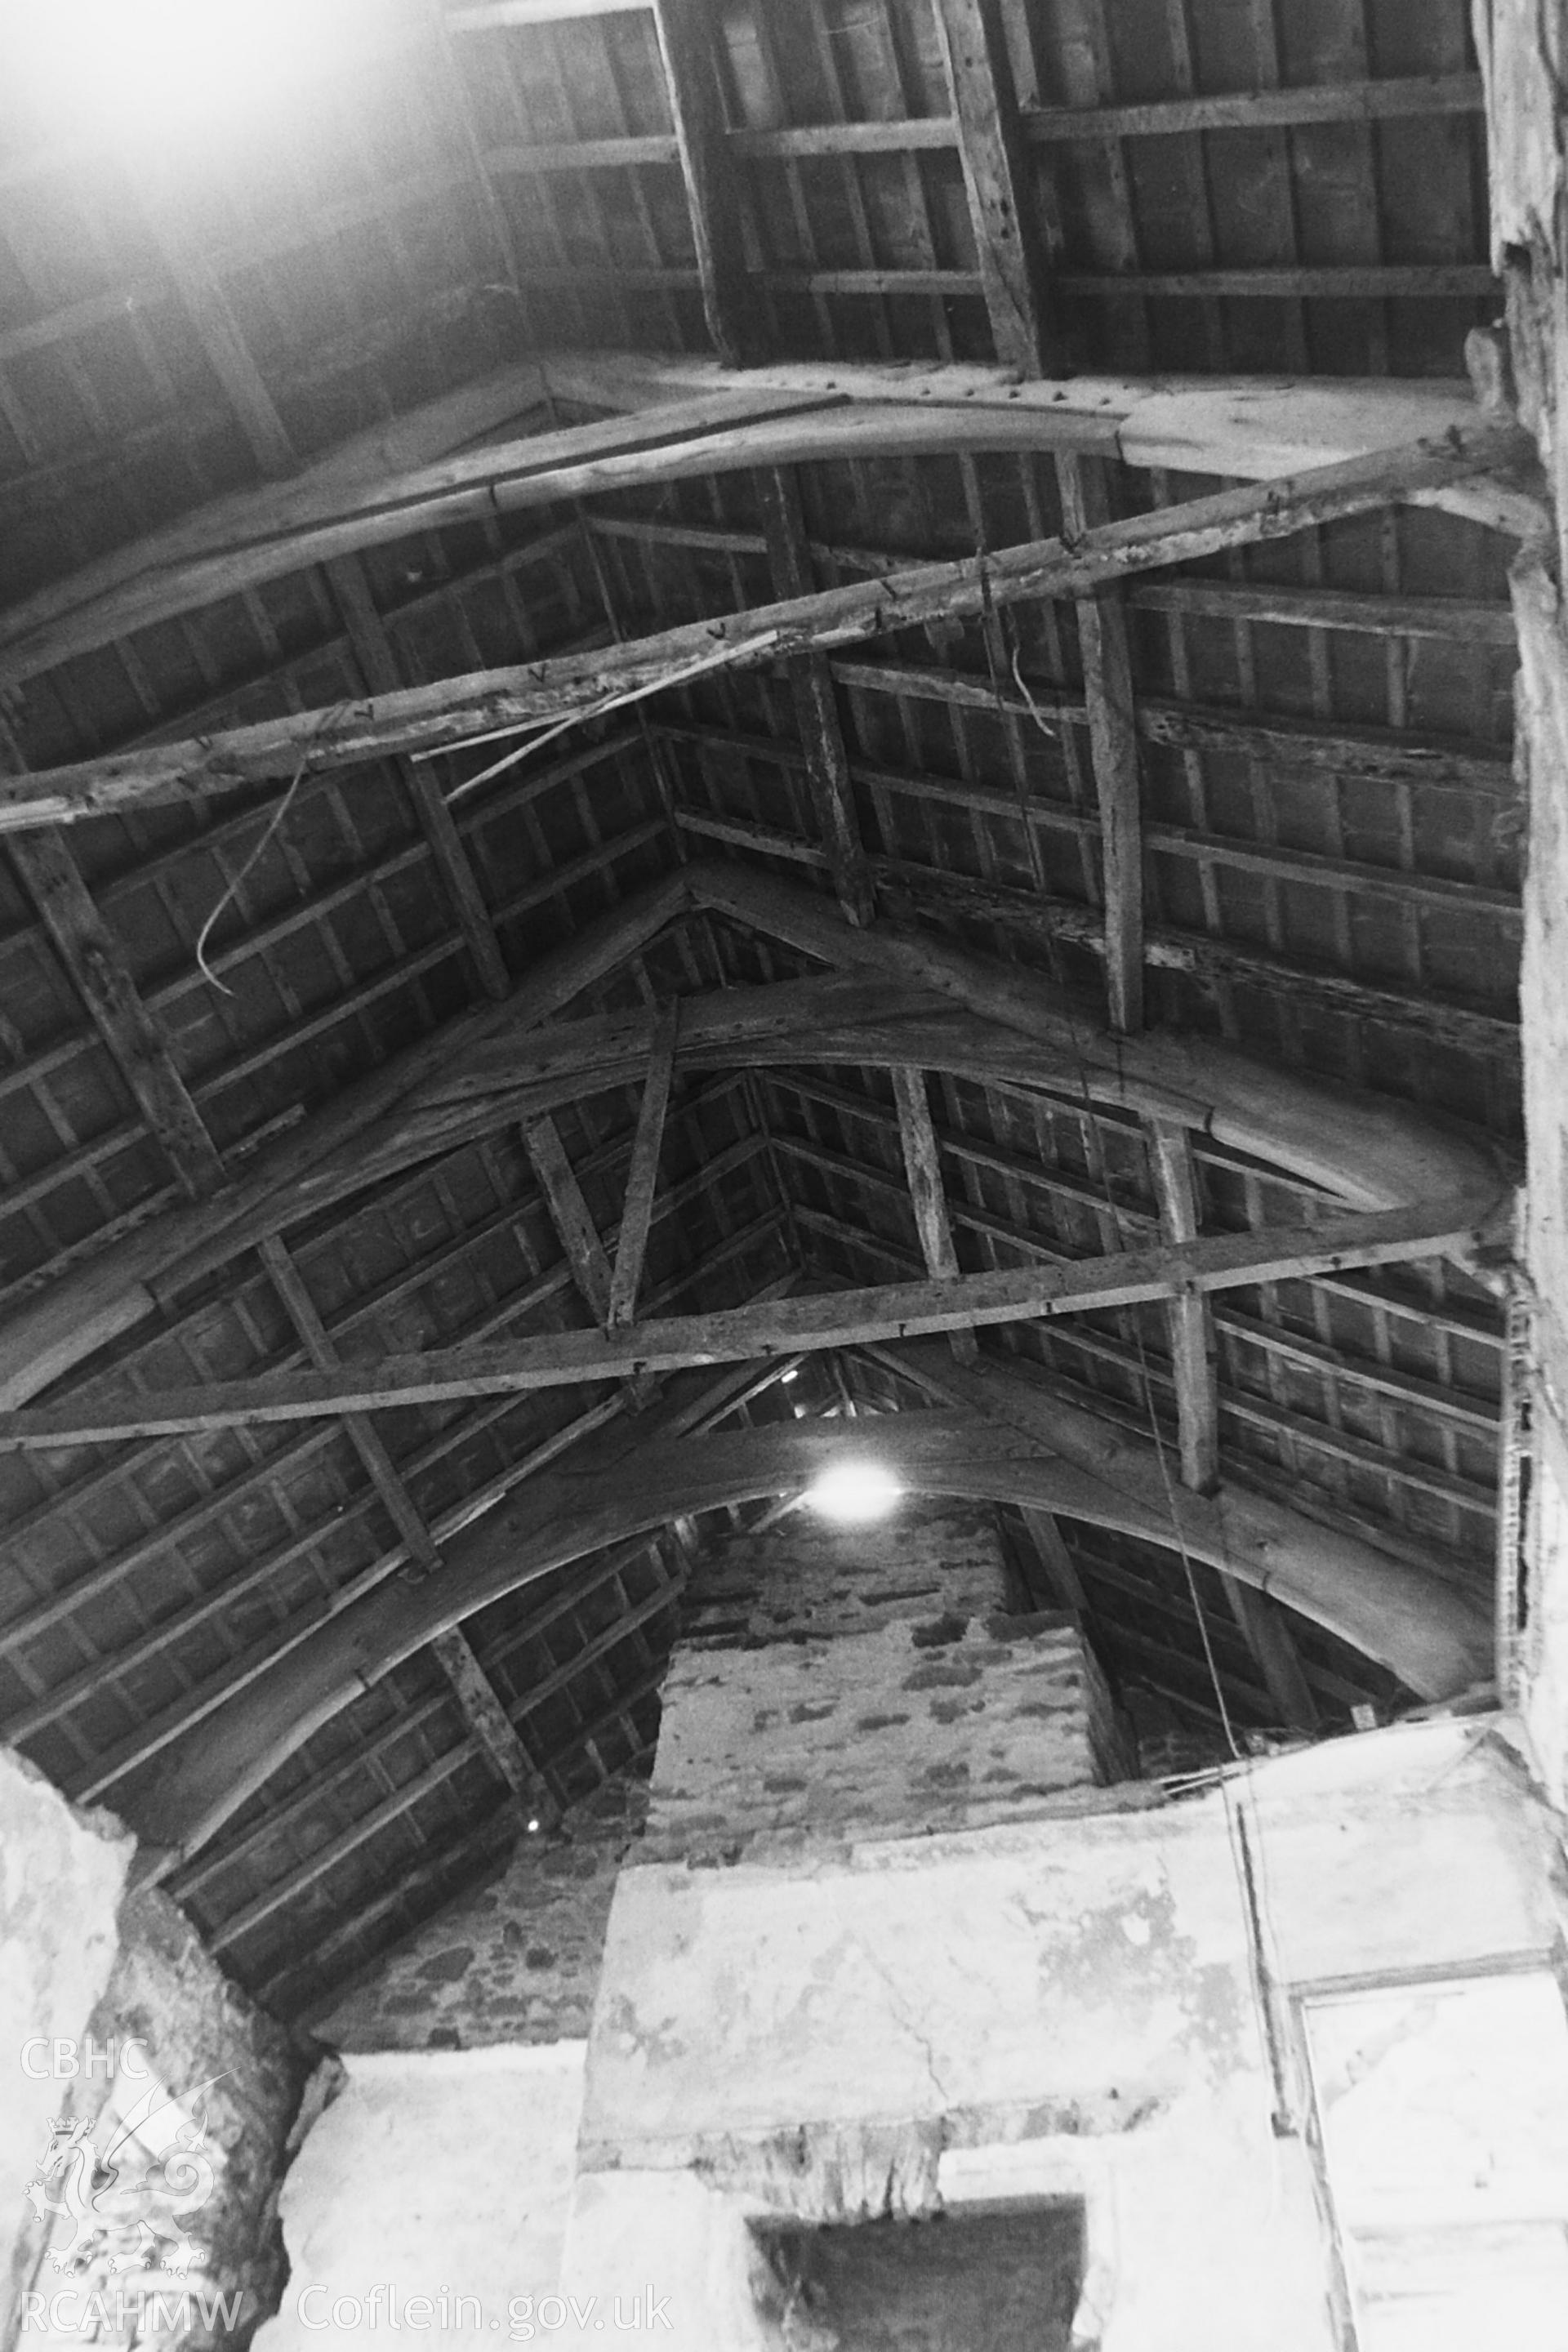 Black and white photo showing interior view of Lletty'r Ychen, taken by Paul R. Davis, 1998.